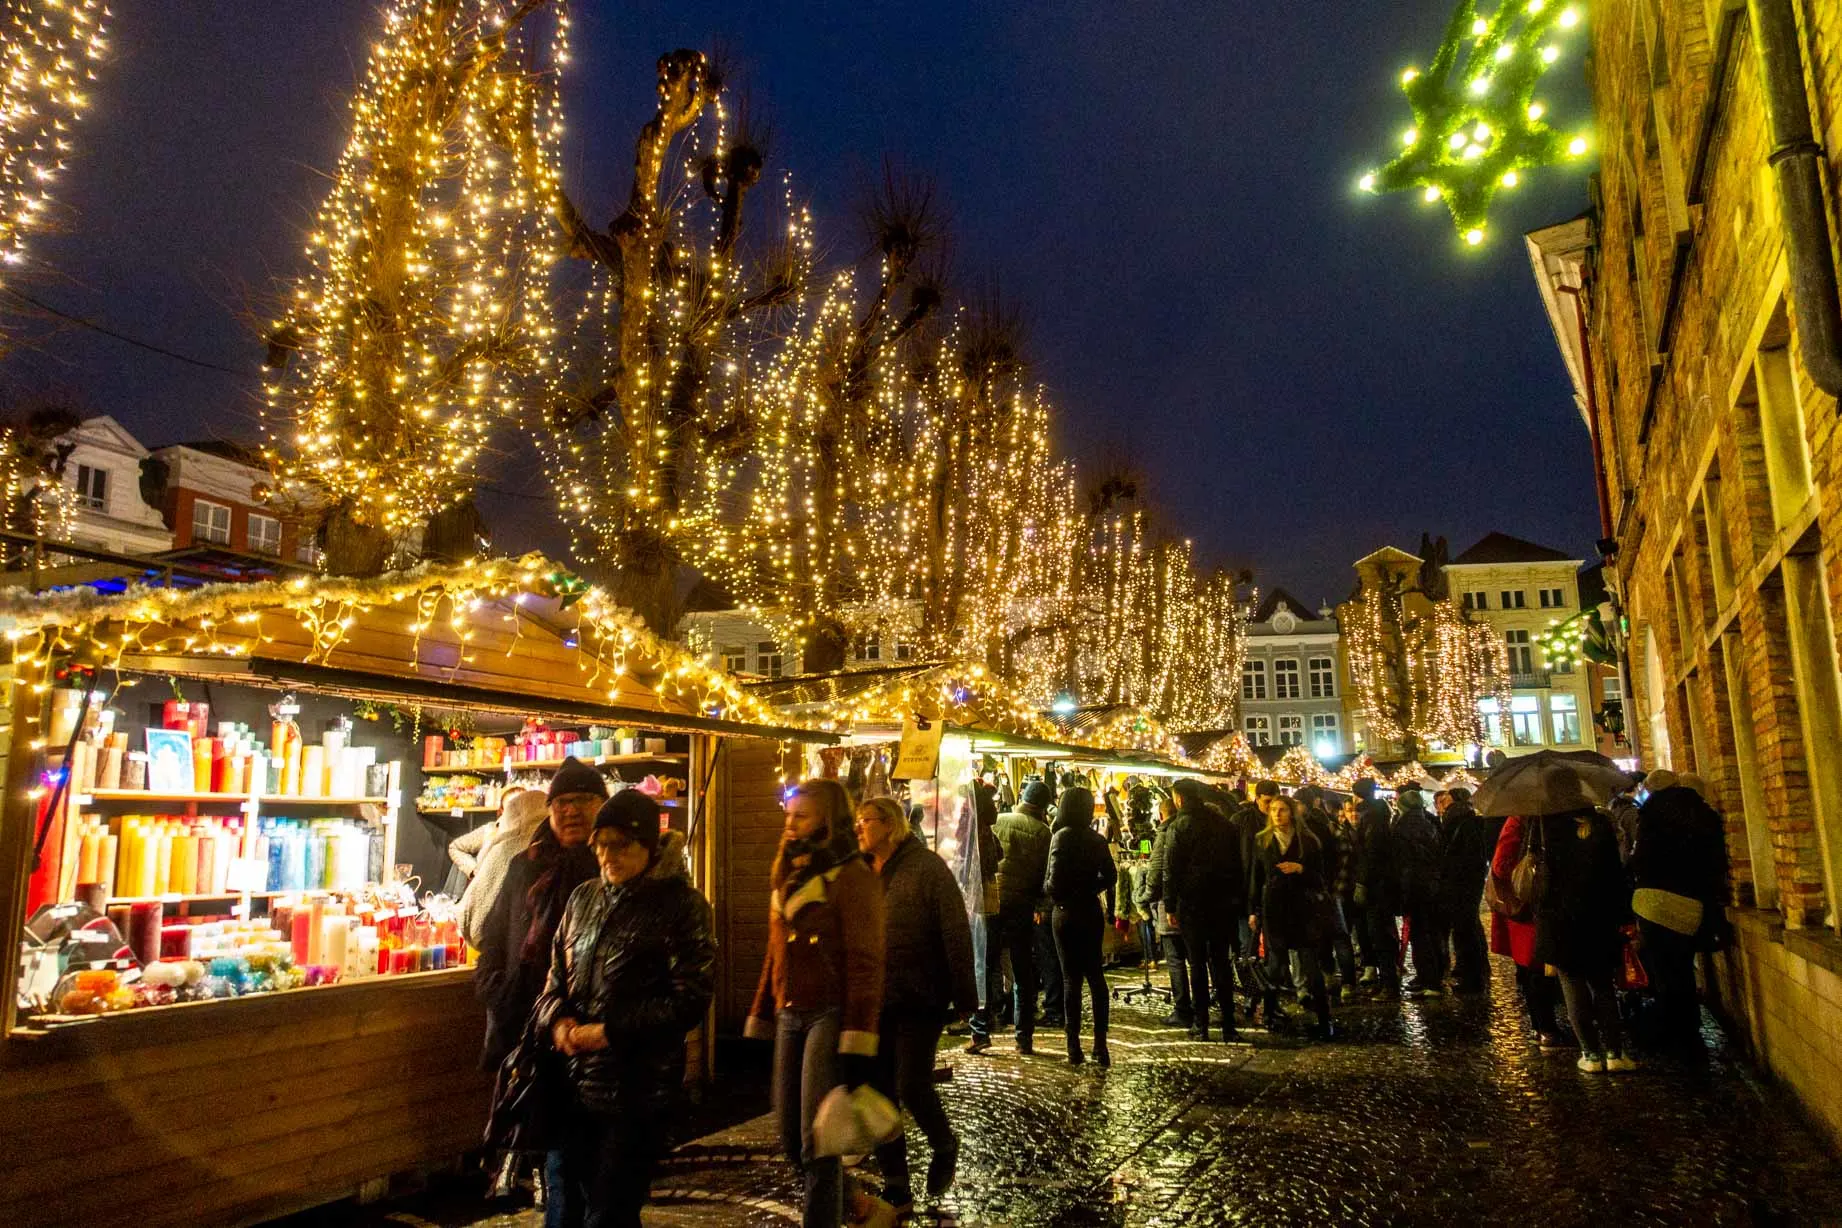 Shoppers at the market stalls decorated with Christmas lights